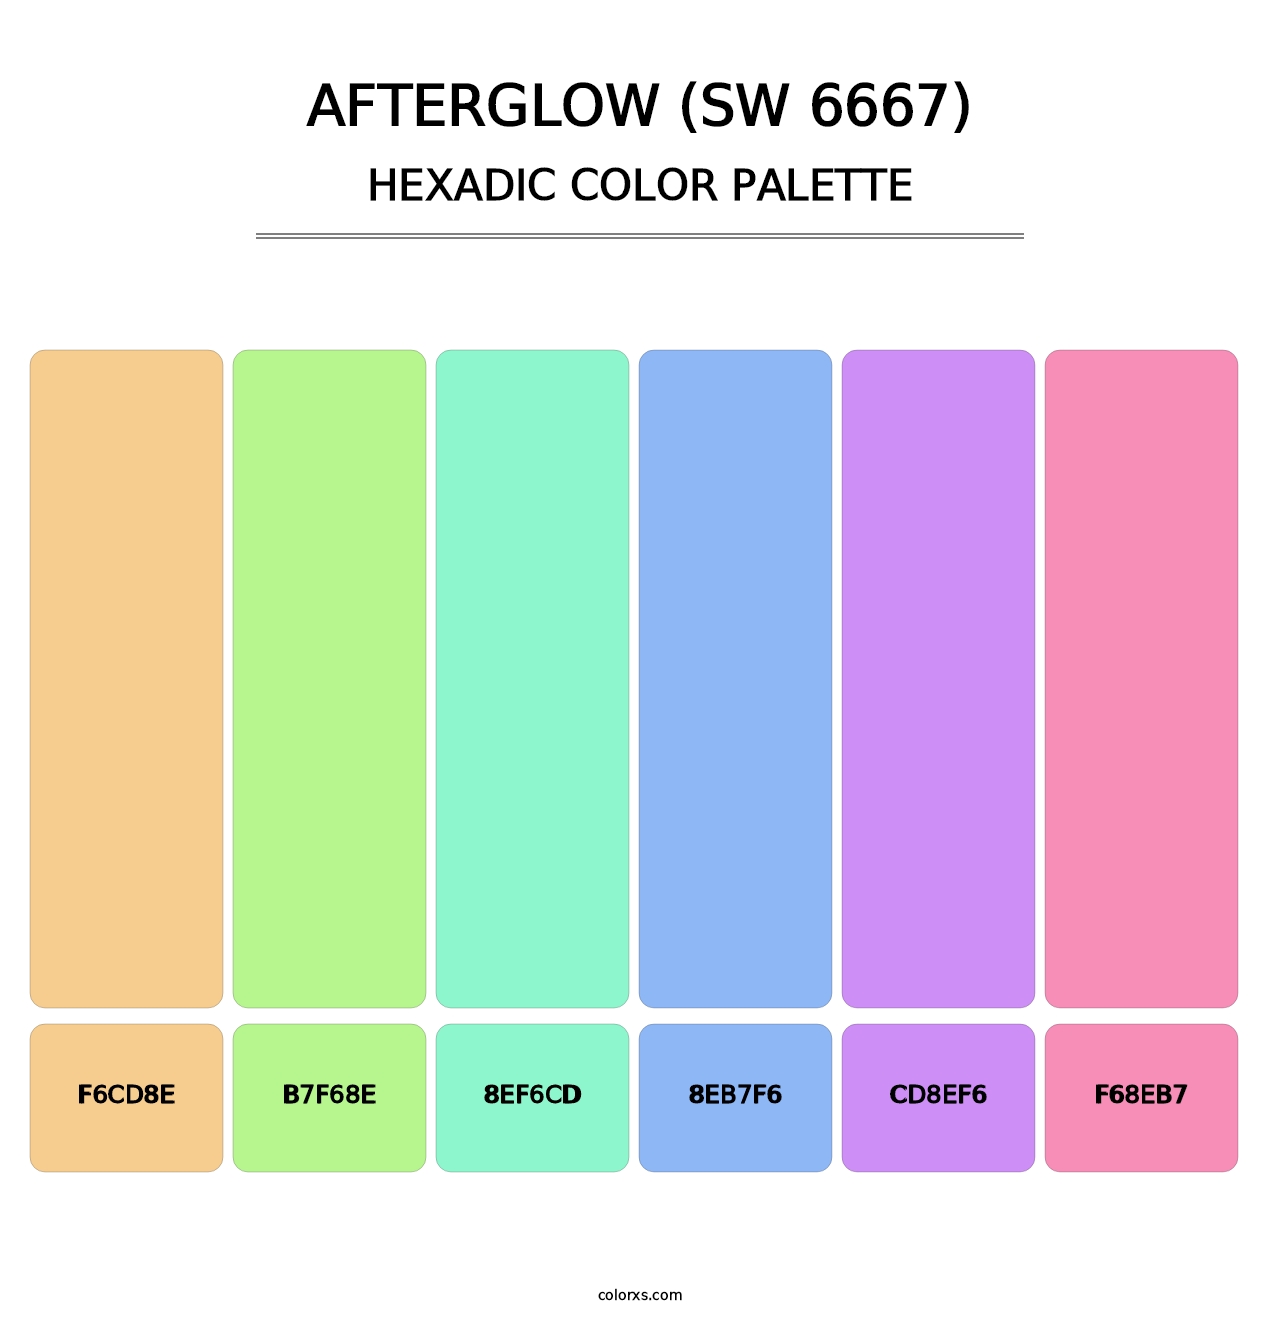 Afterglow (SW 6667) - Hexadic Color Palette